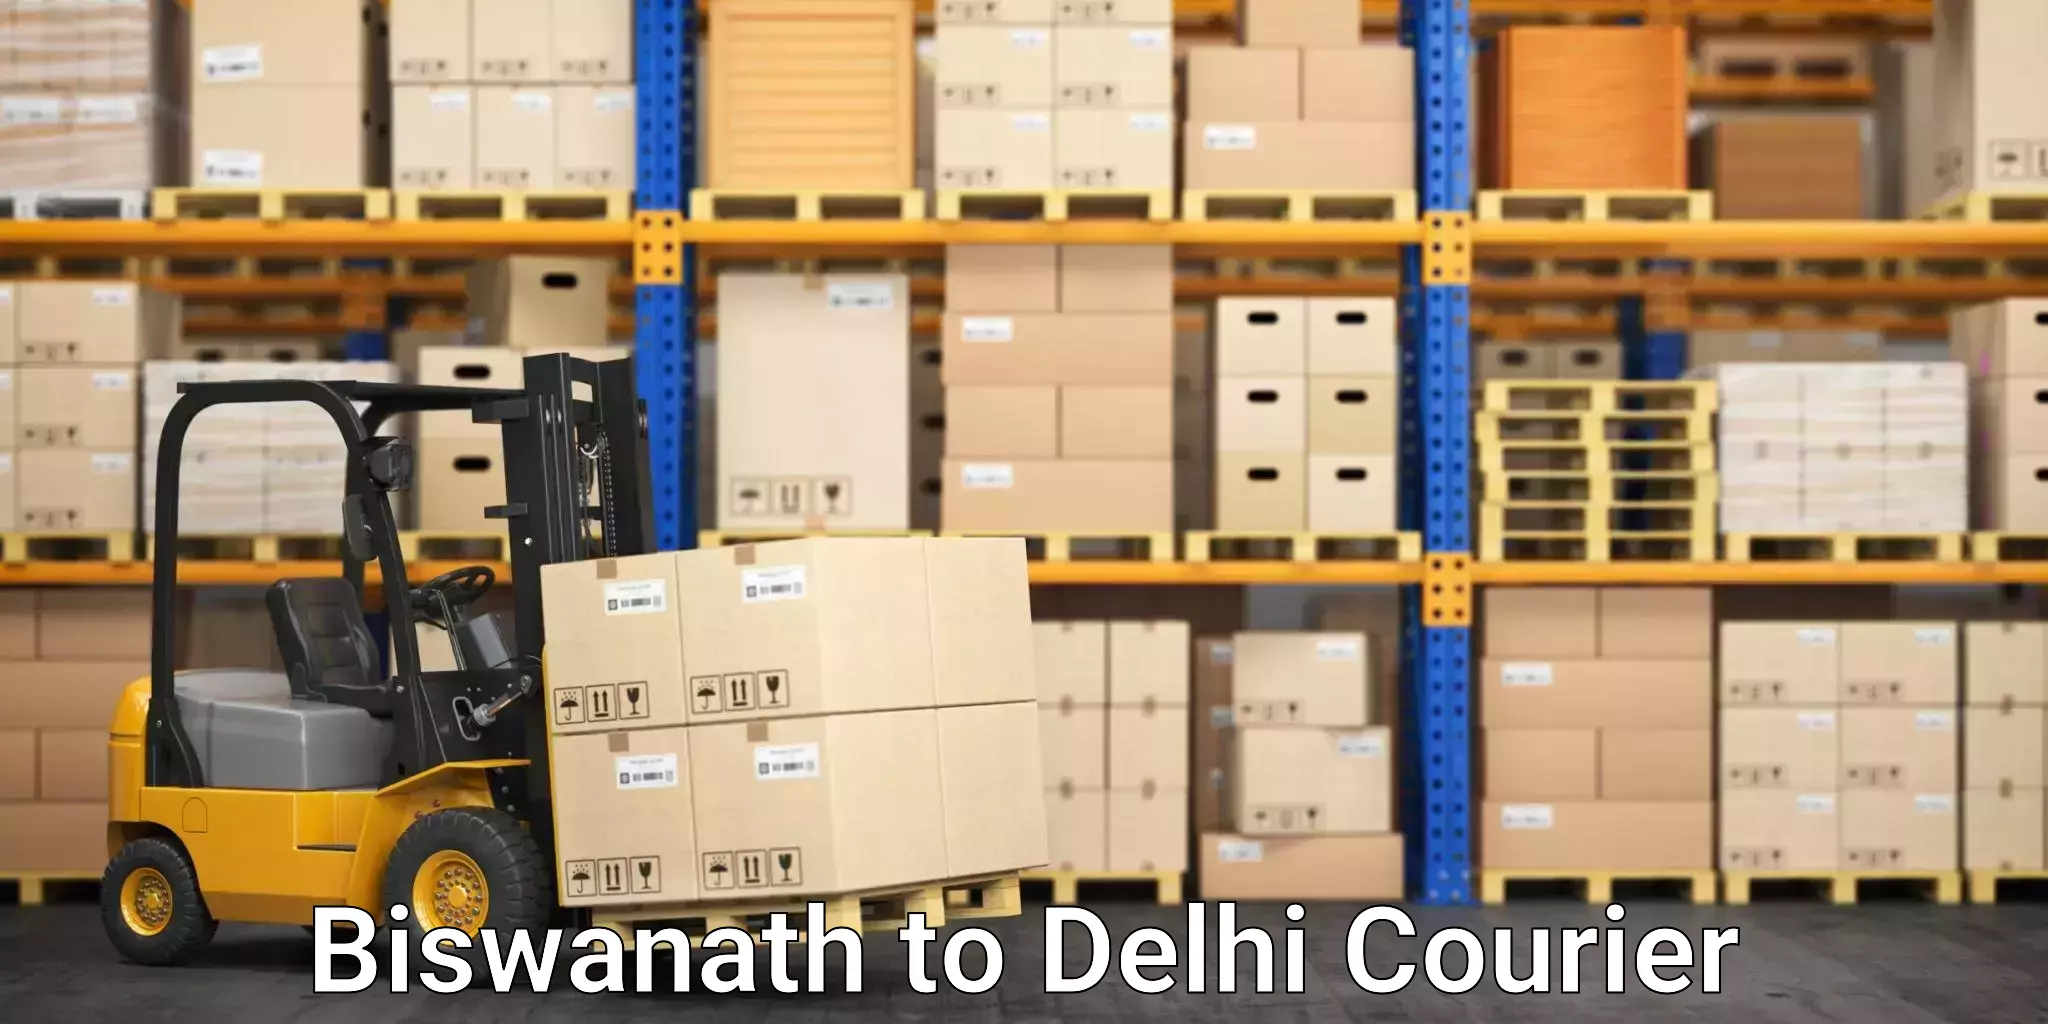 Overnight delivery services Biswanath to Delhi